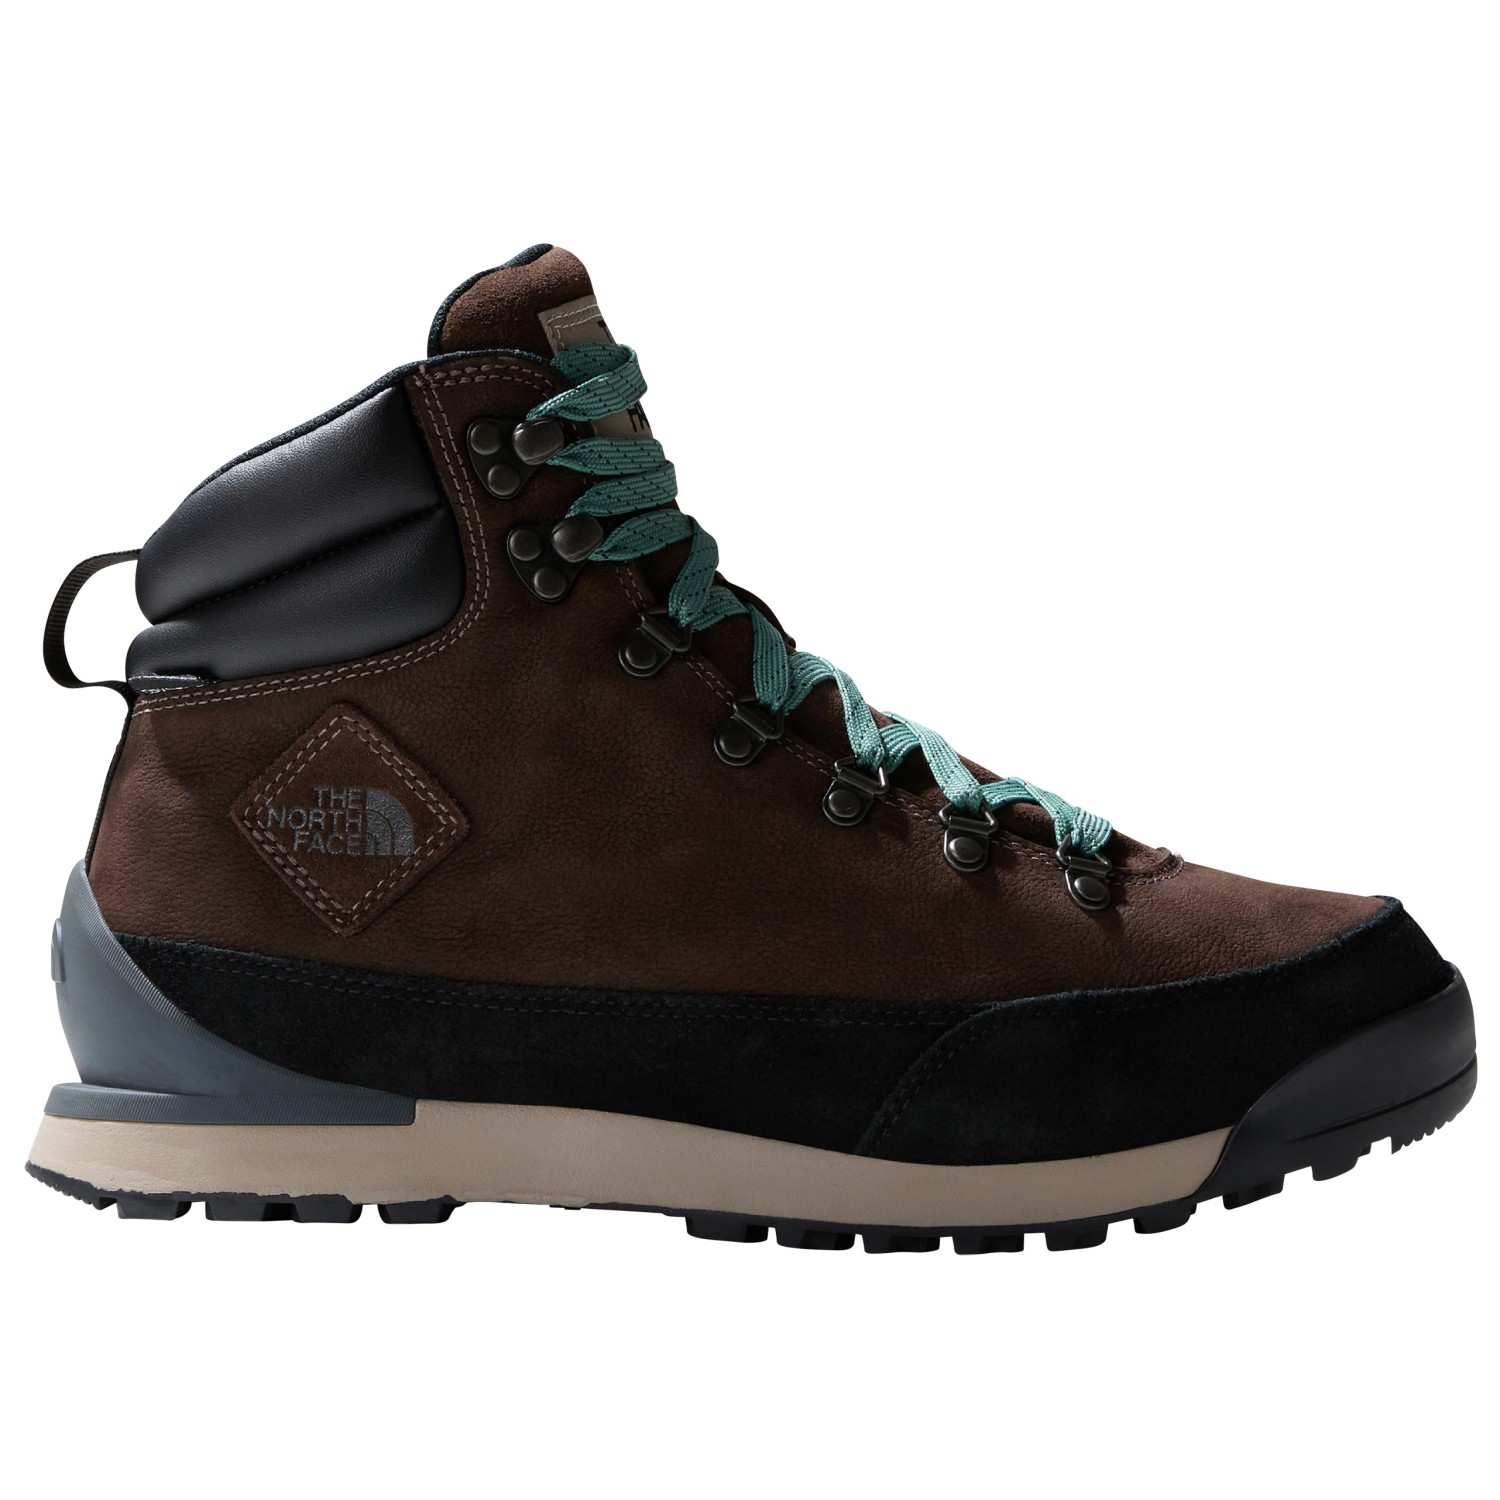 The North Face - Back-To-Berkeley IV Leather WP - Sneaker